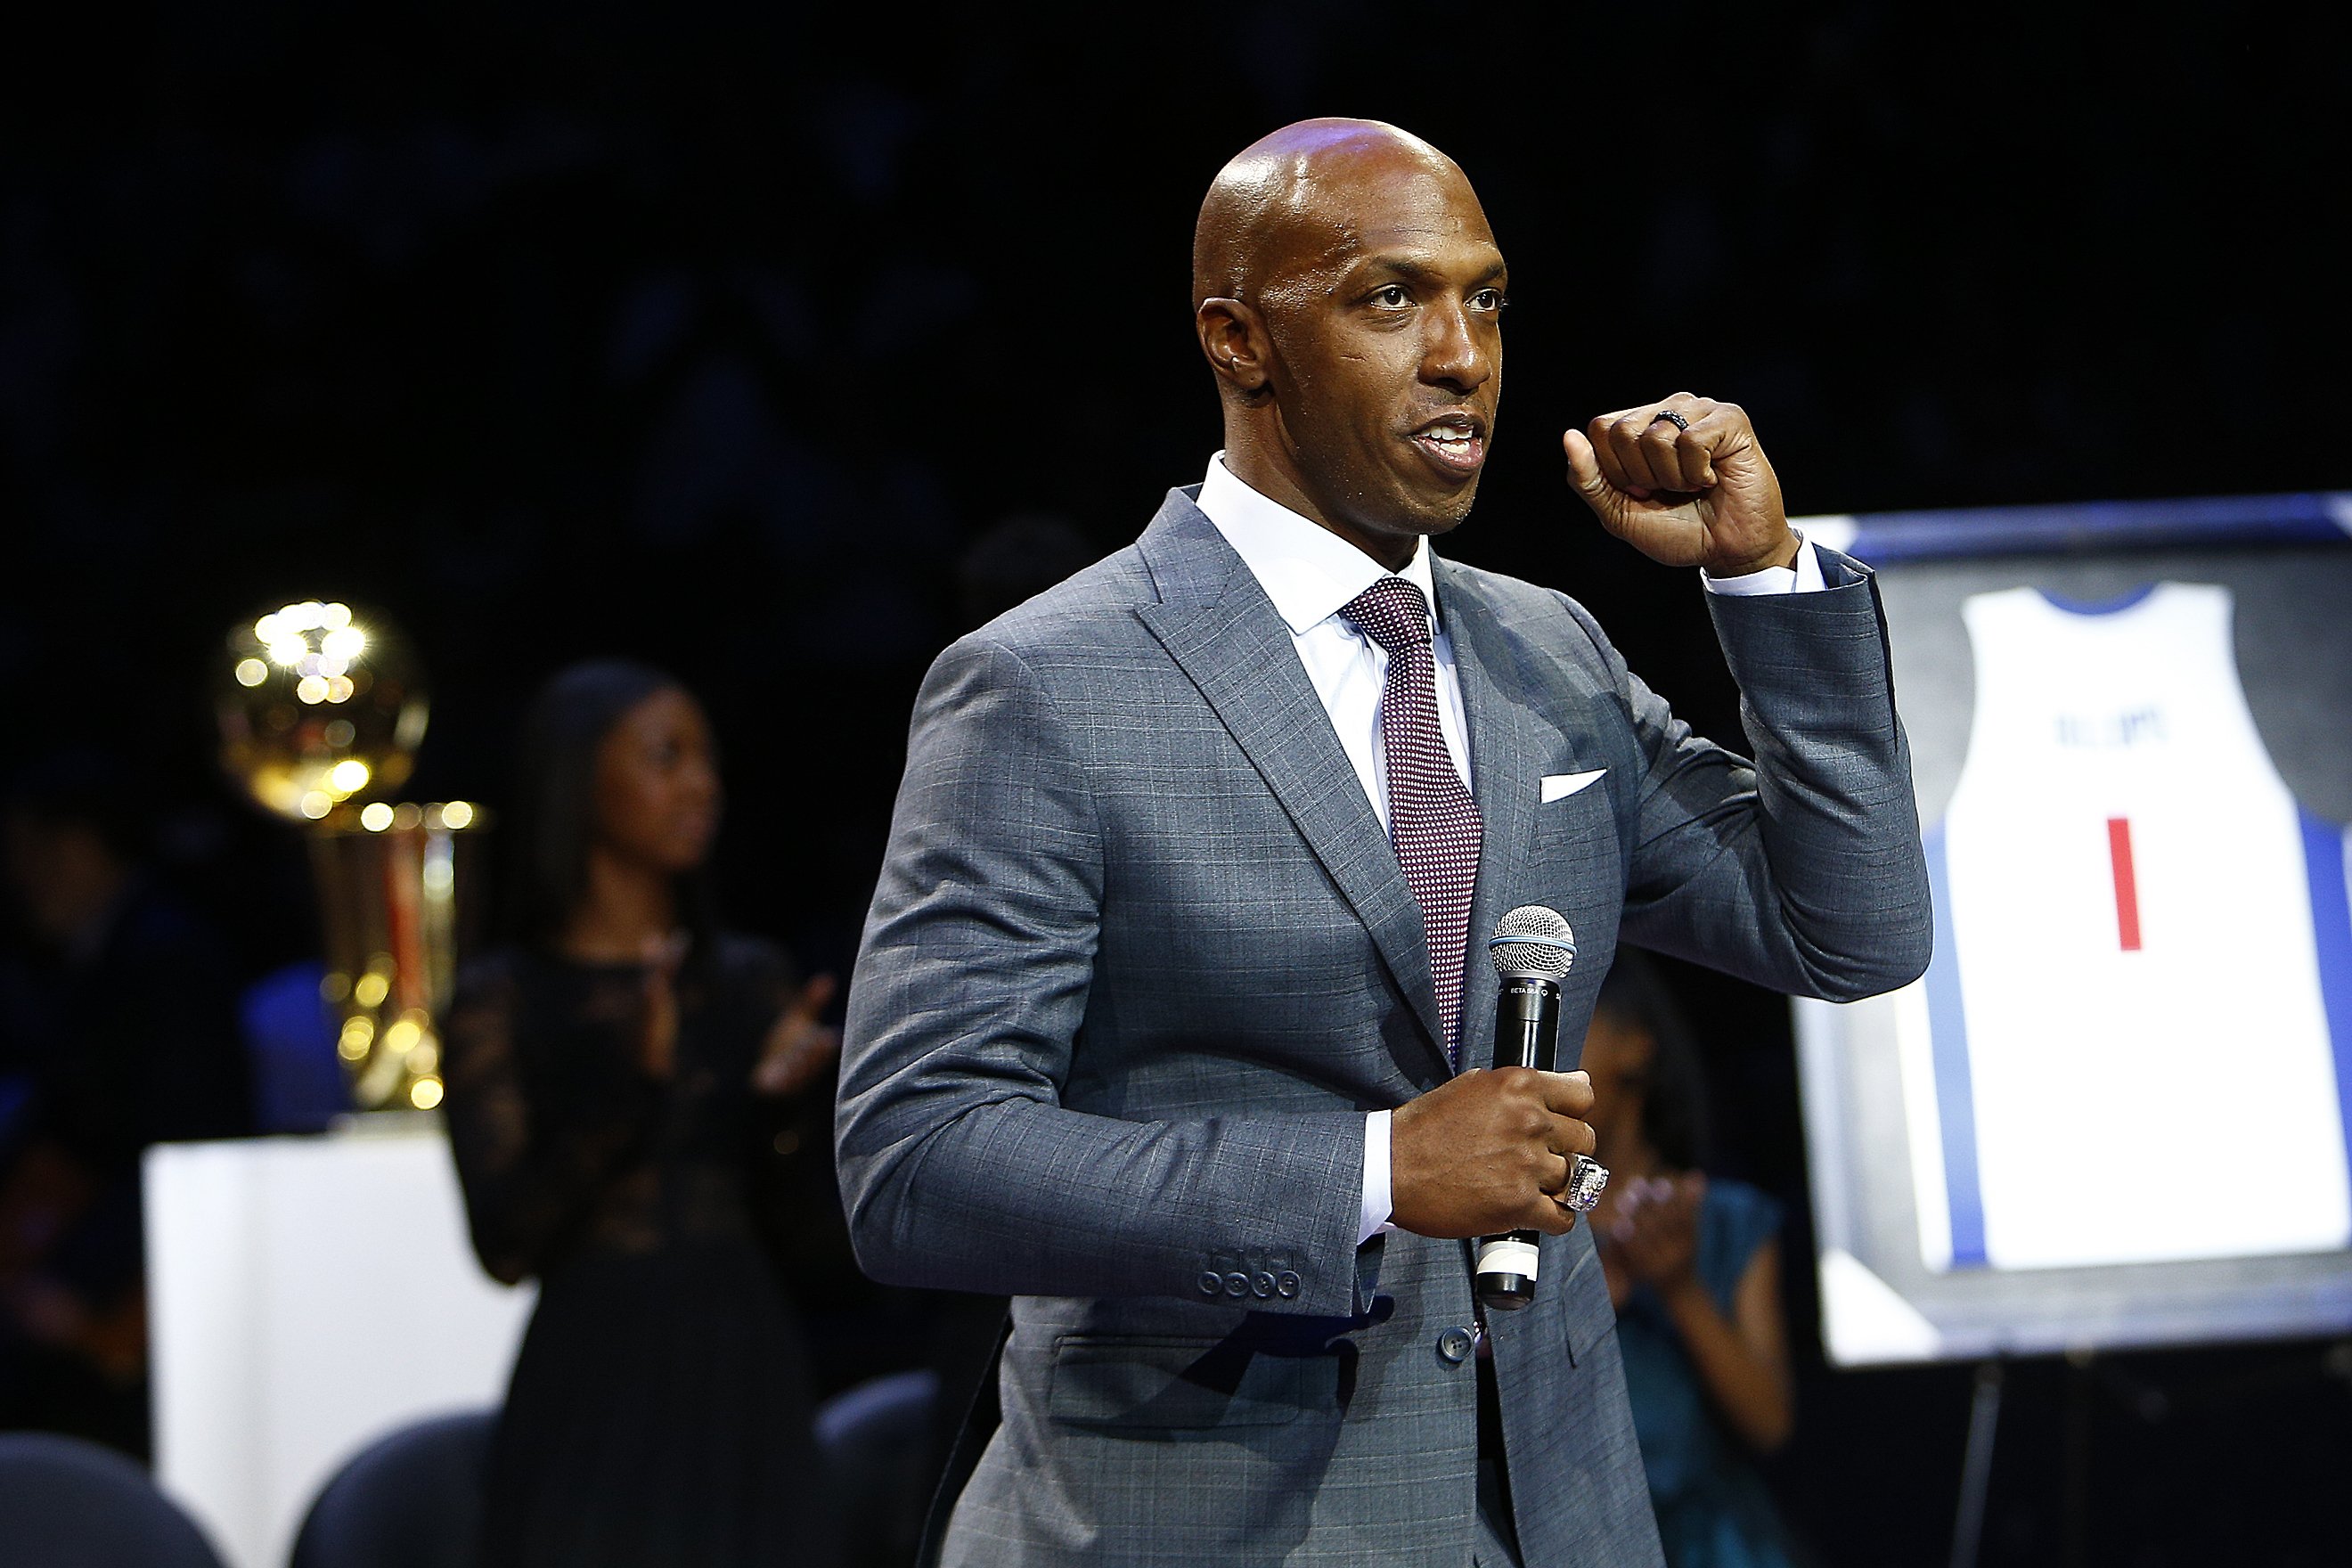 Chauncey Billups undecided on playing future as post-basketball career  beckons 